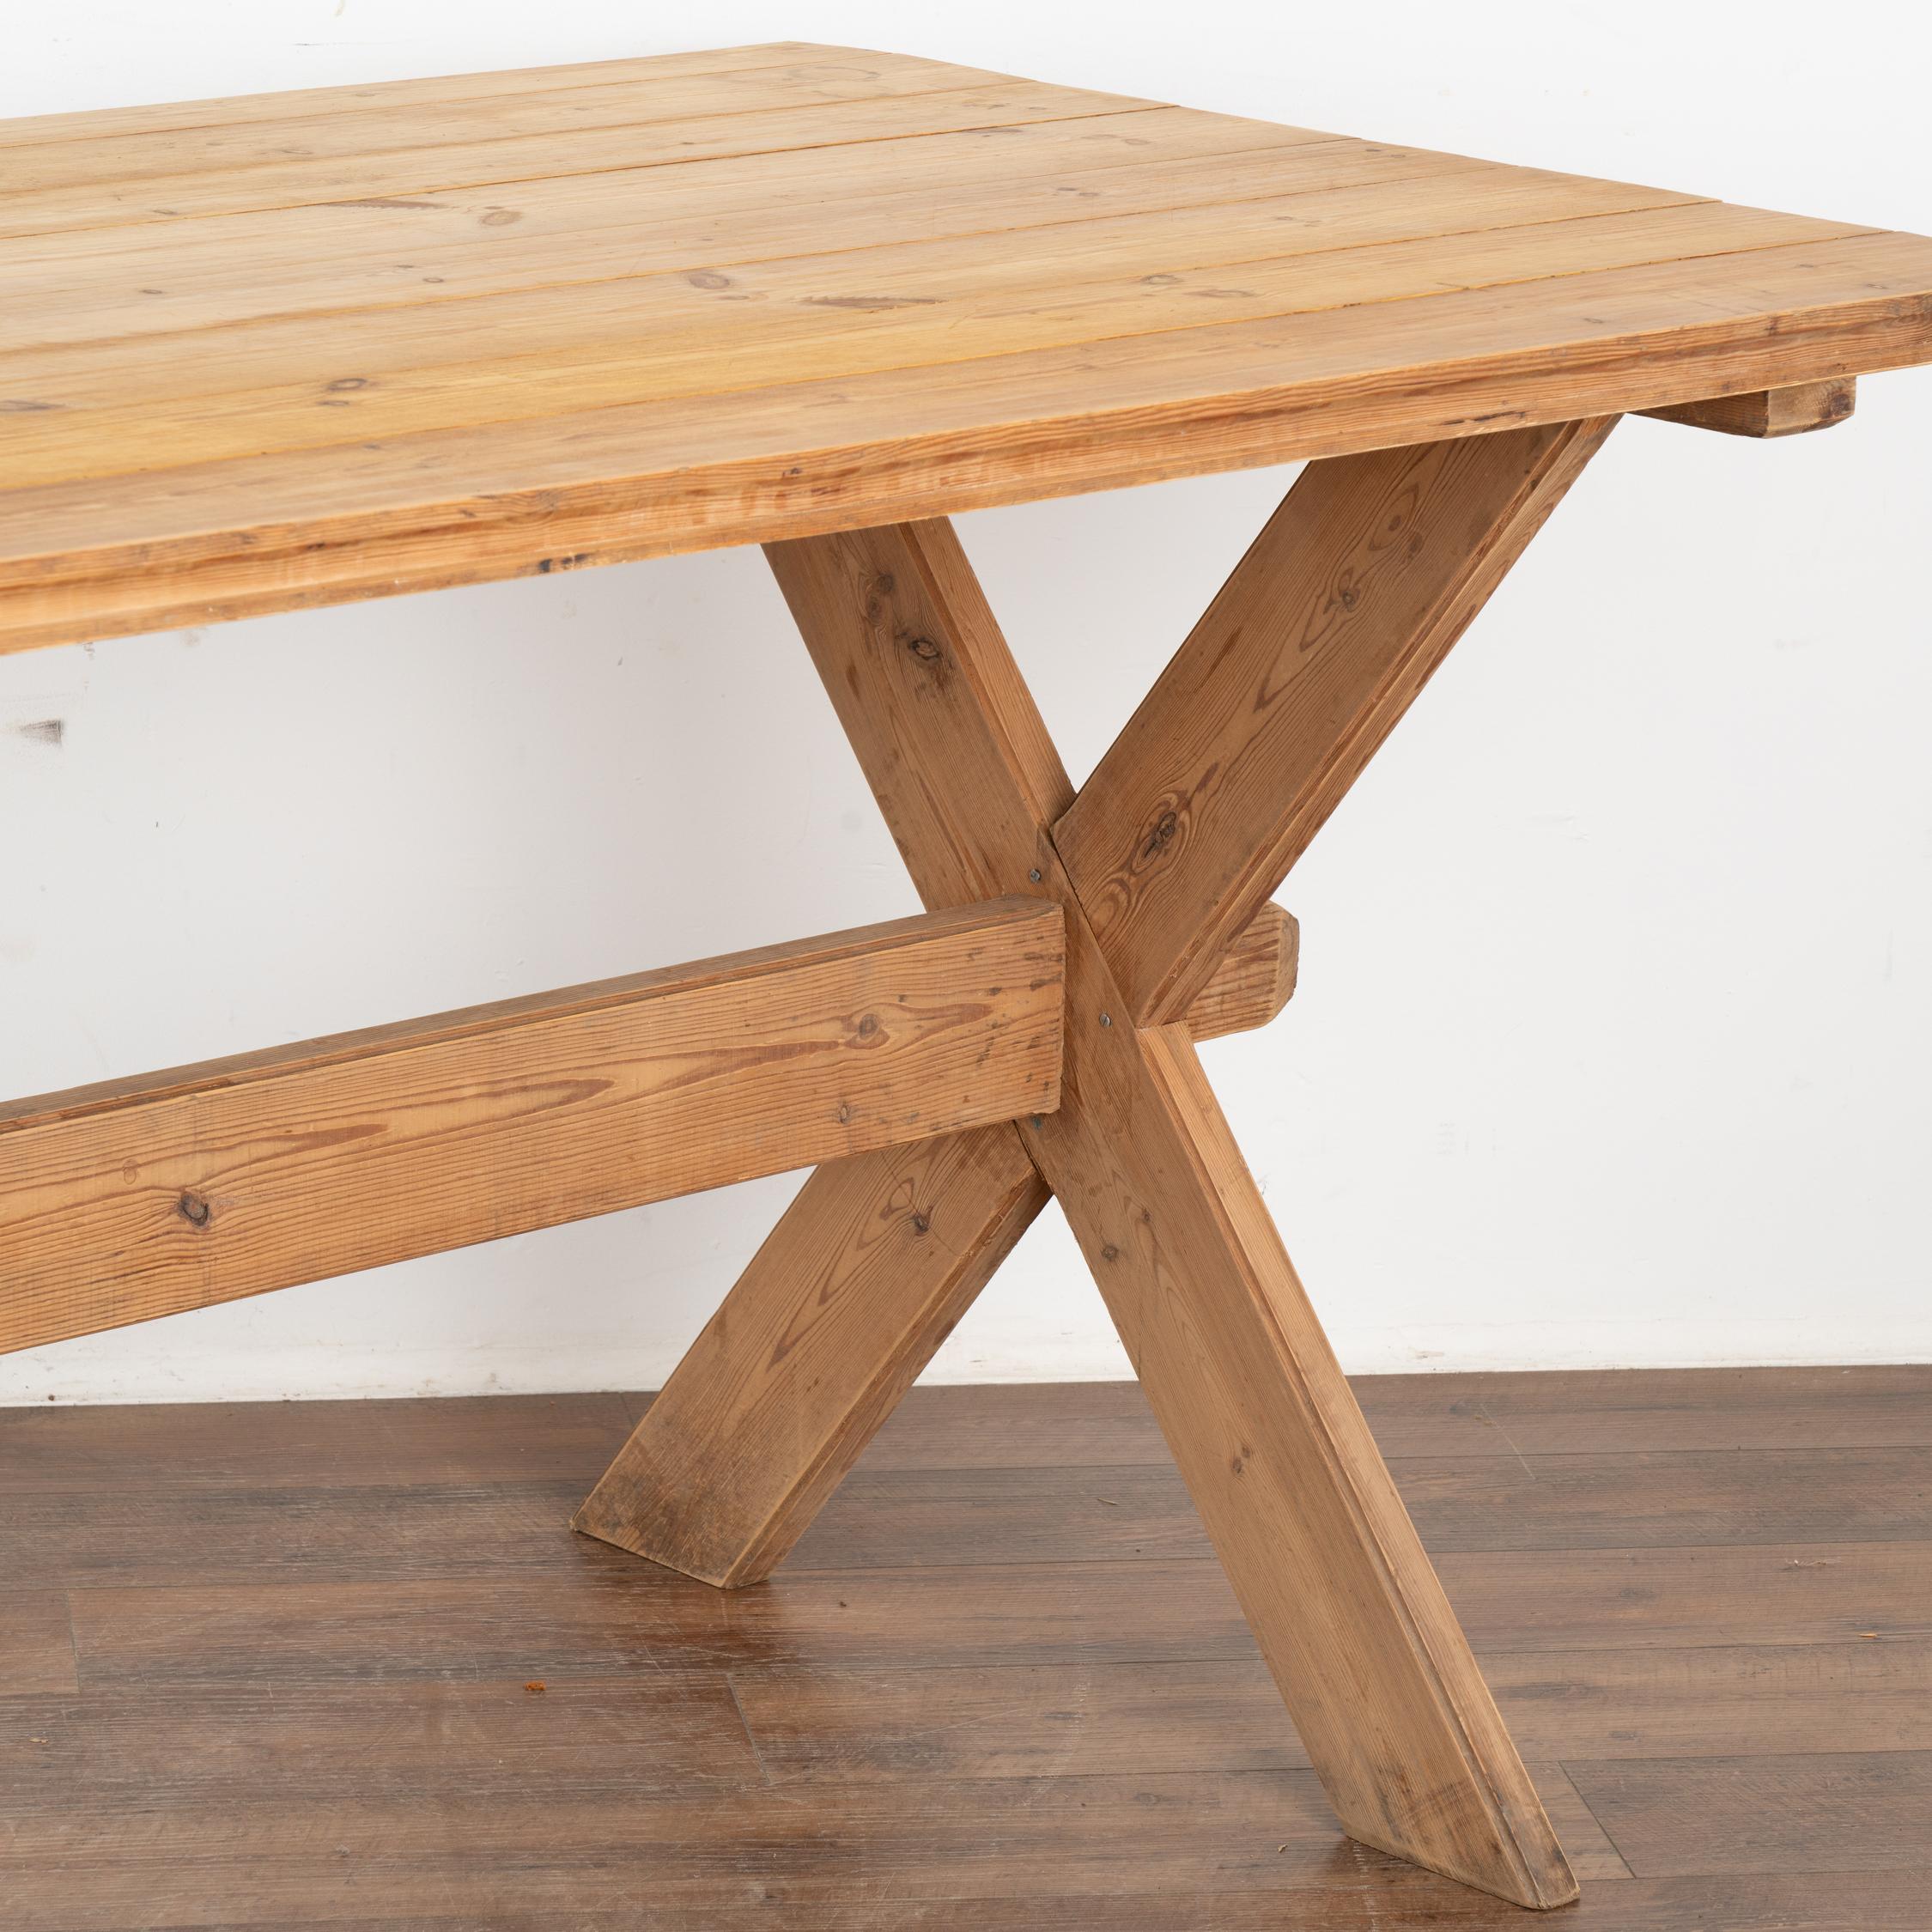 19th Century Antique Pine Farm Table Dining Table with Trestle Base, Hungary circa 1880 For Sale